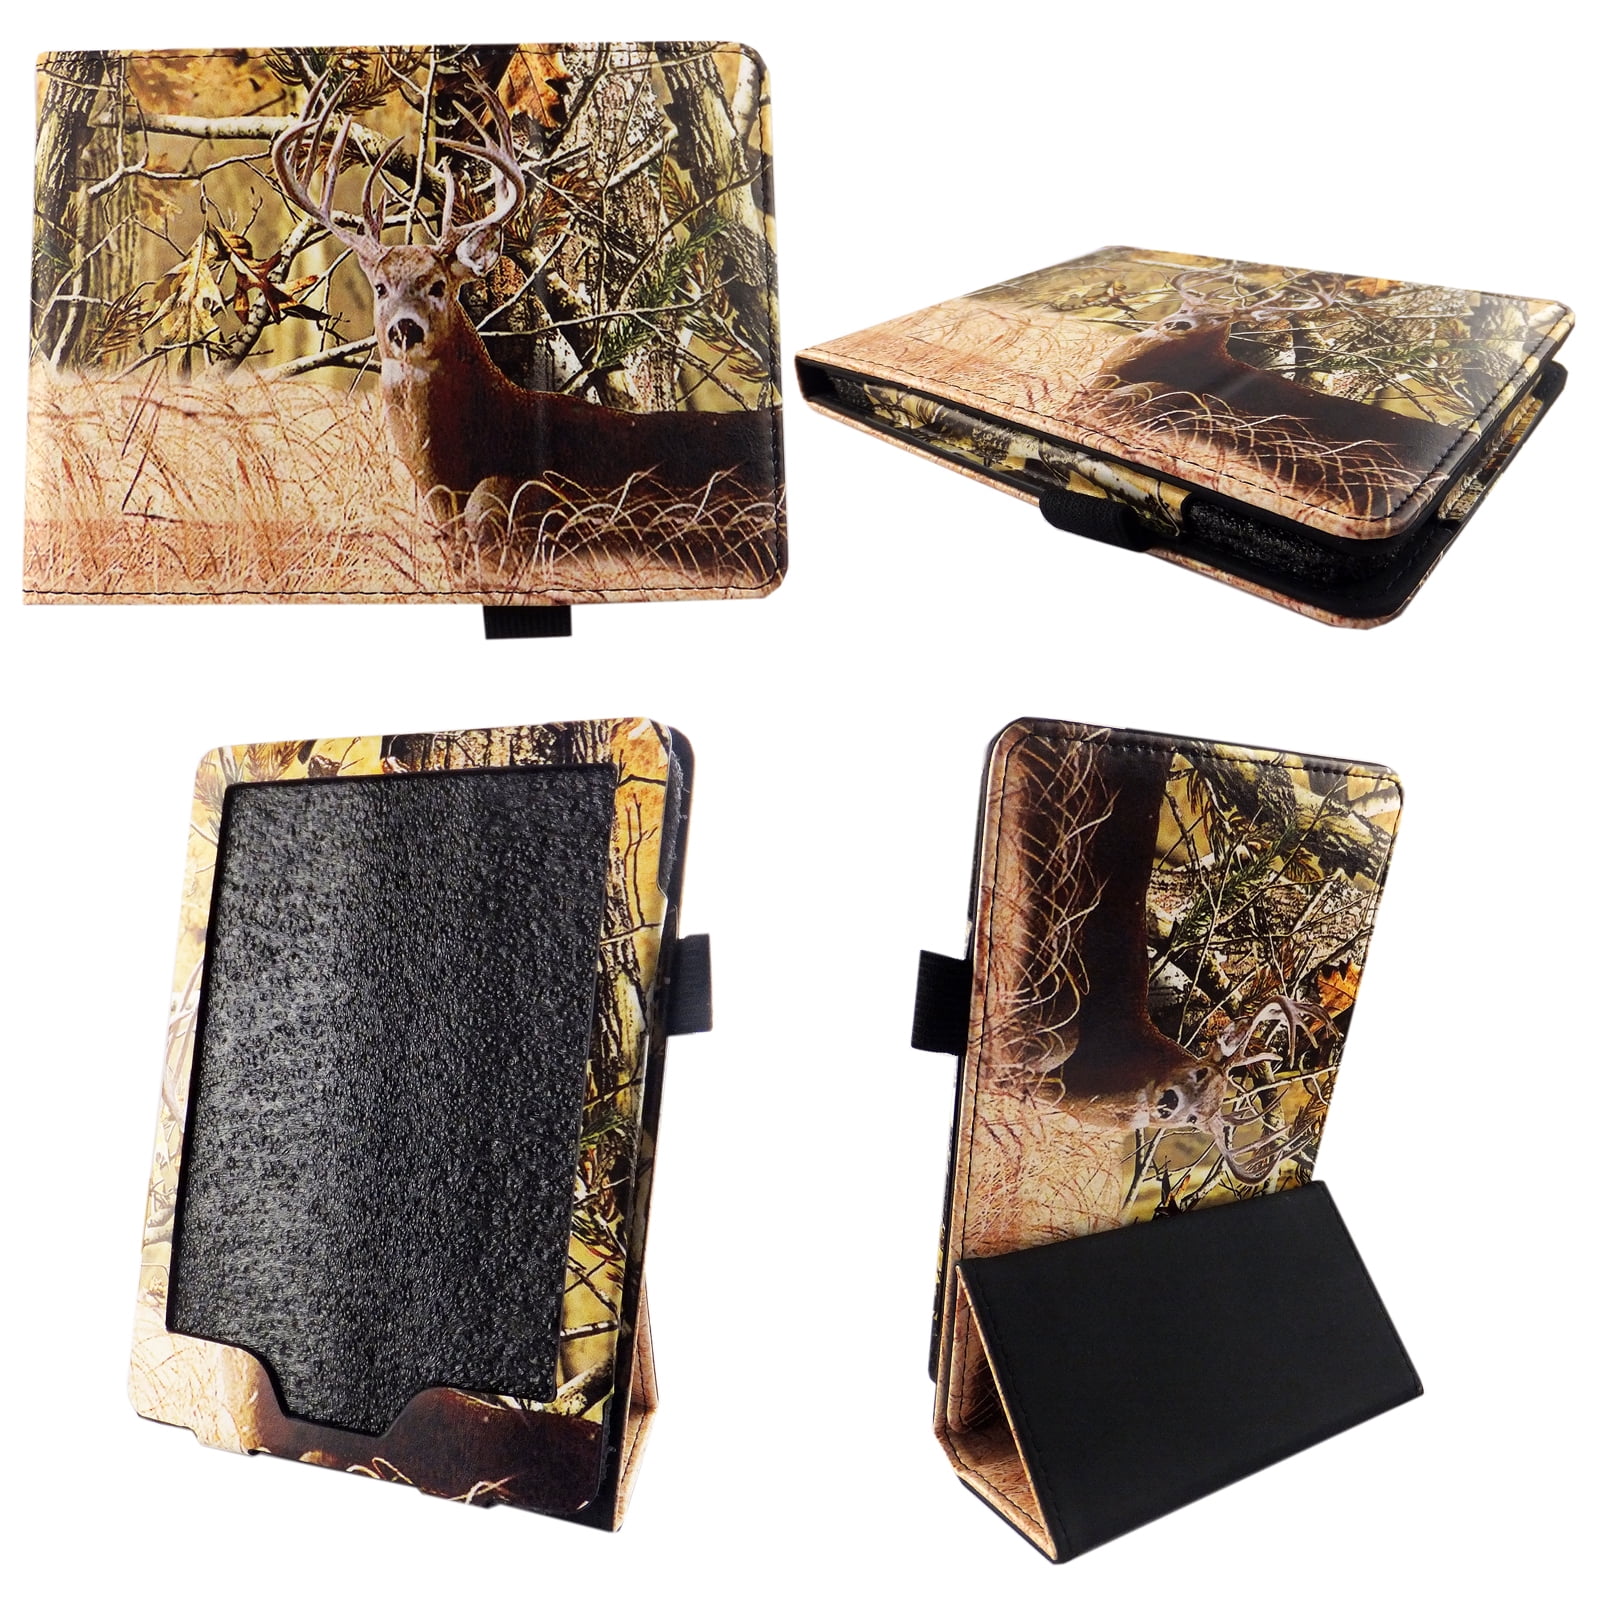 Camo Deer Case for All-new Kindle 6 inch (10th Gen, 2019 Release ...